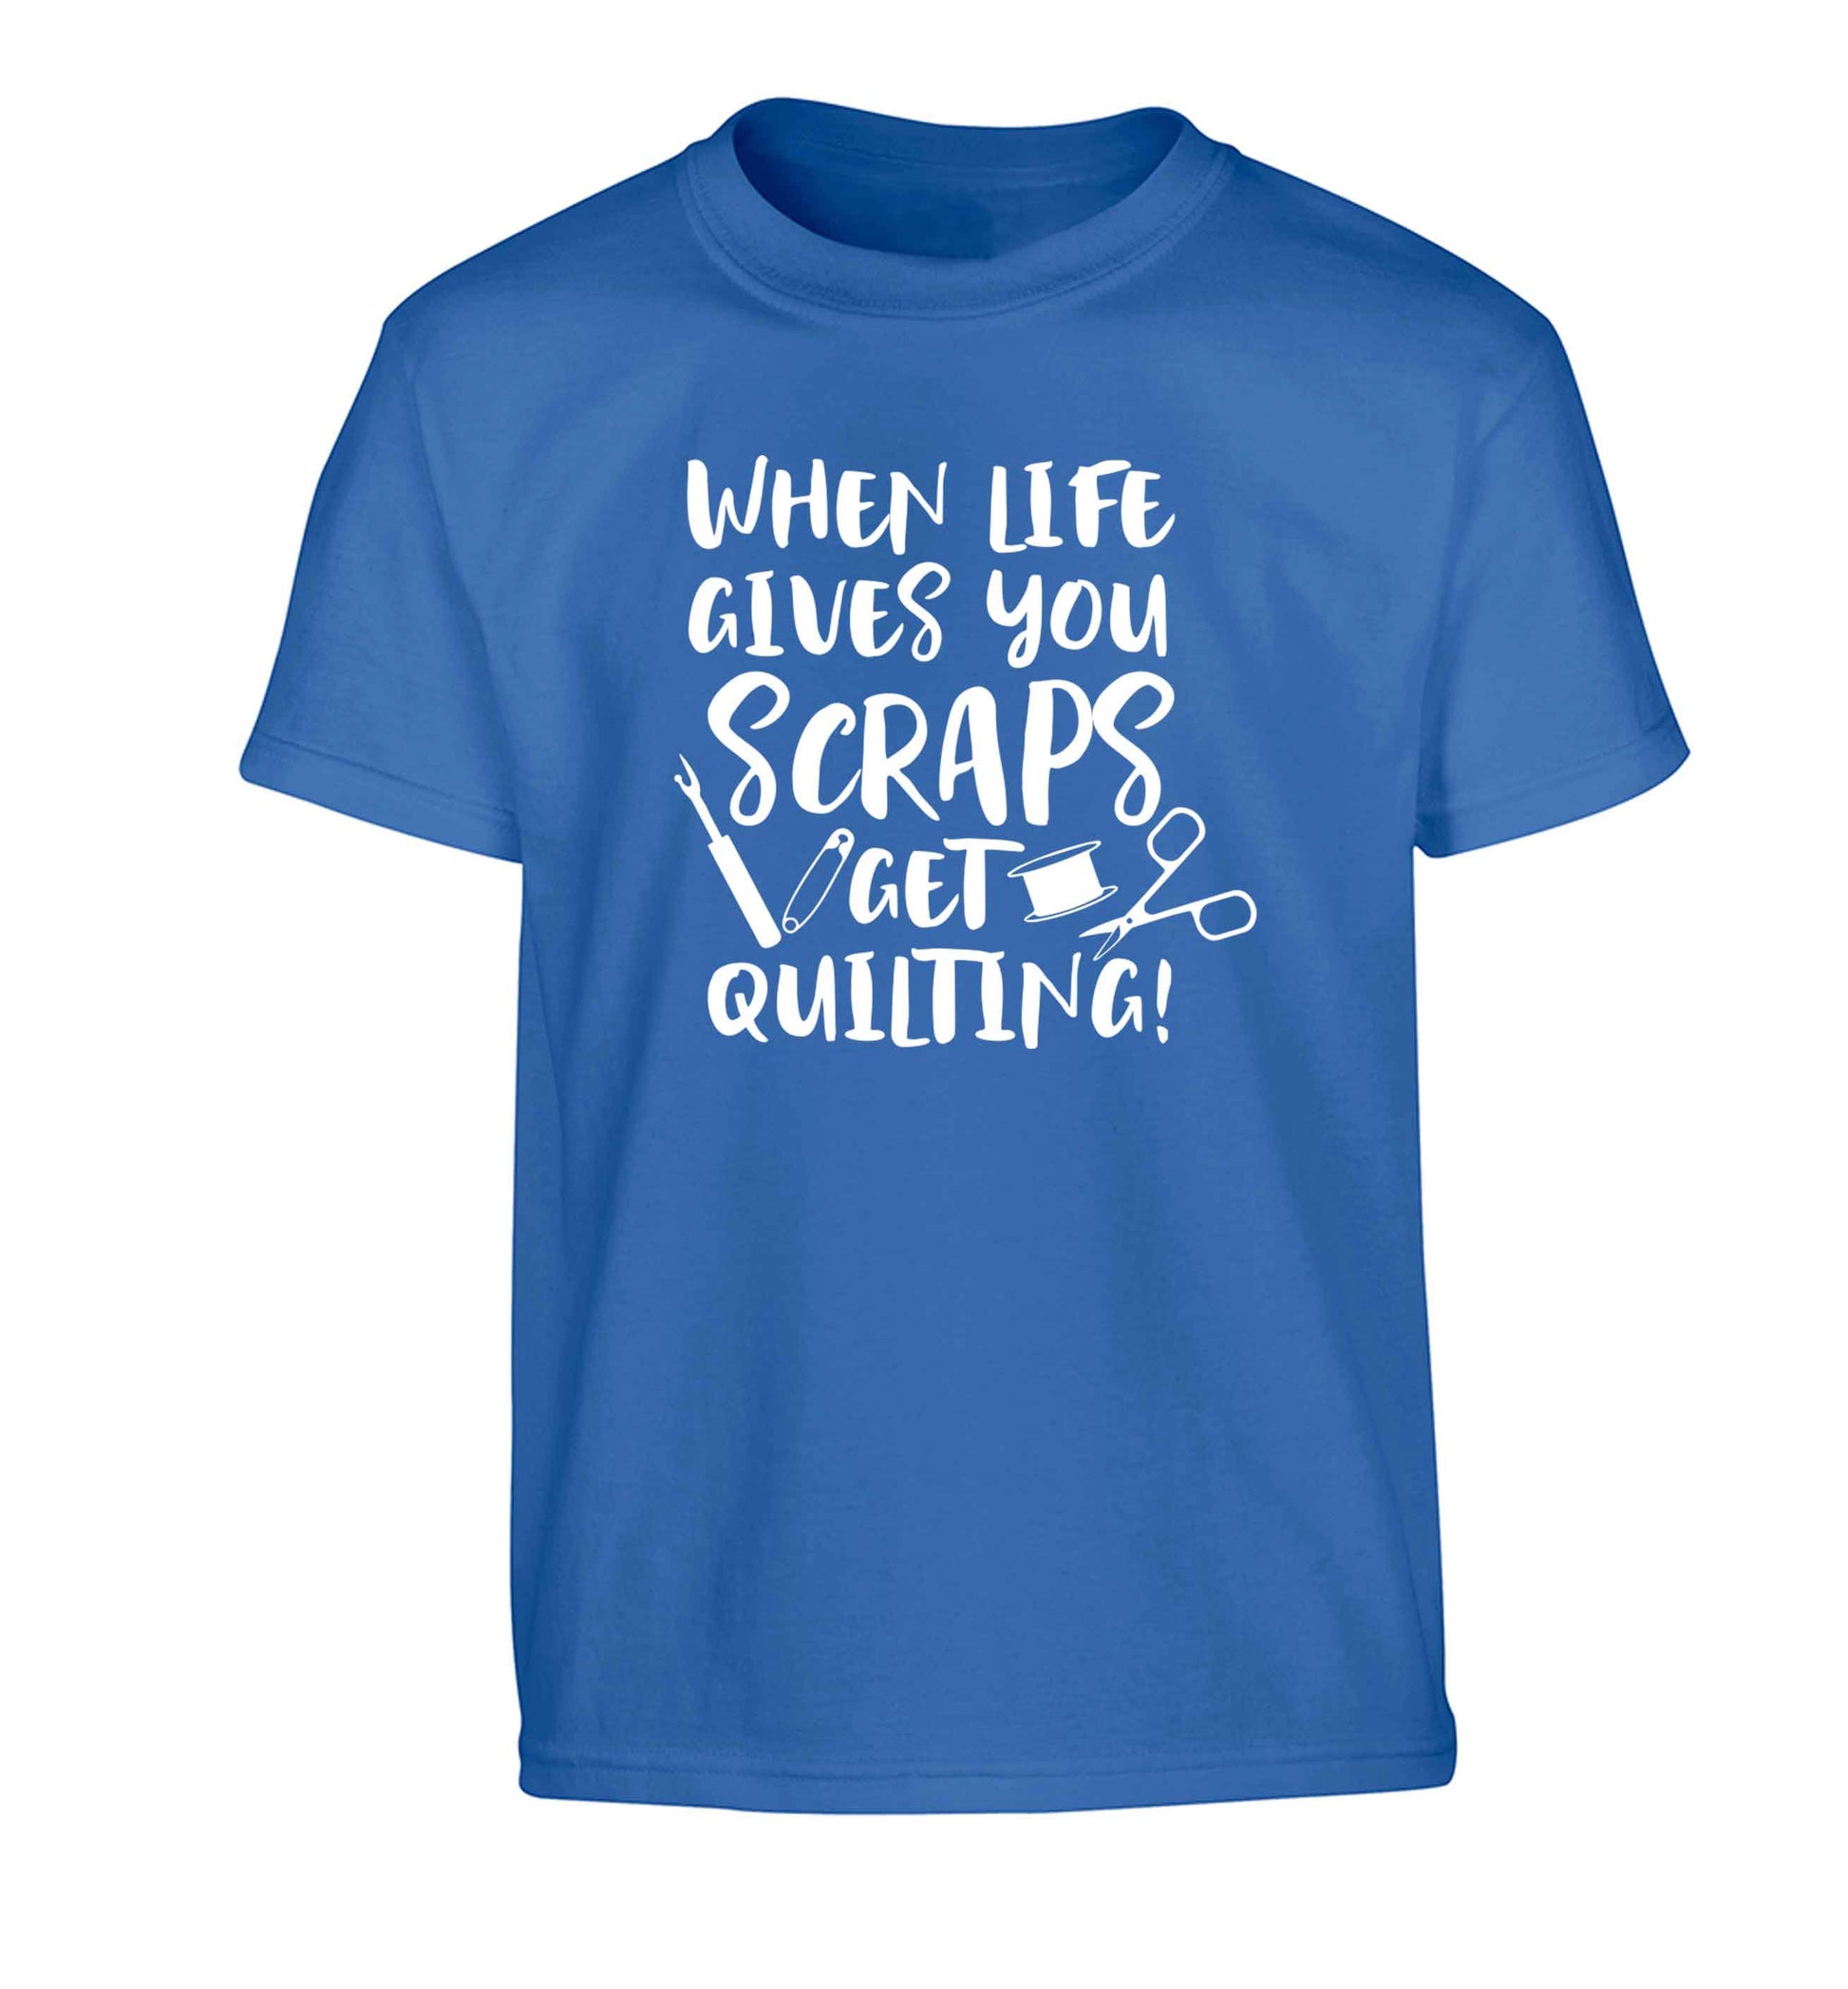 When life gives you scraps get quilting! Children's blue Tshirt 12-13 Years